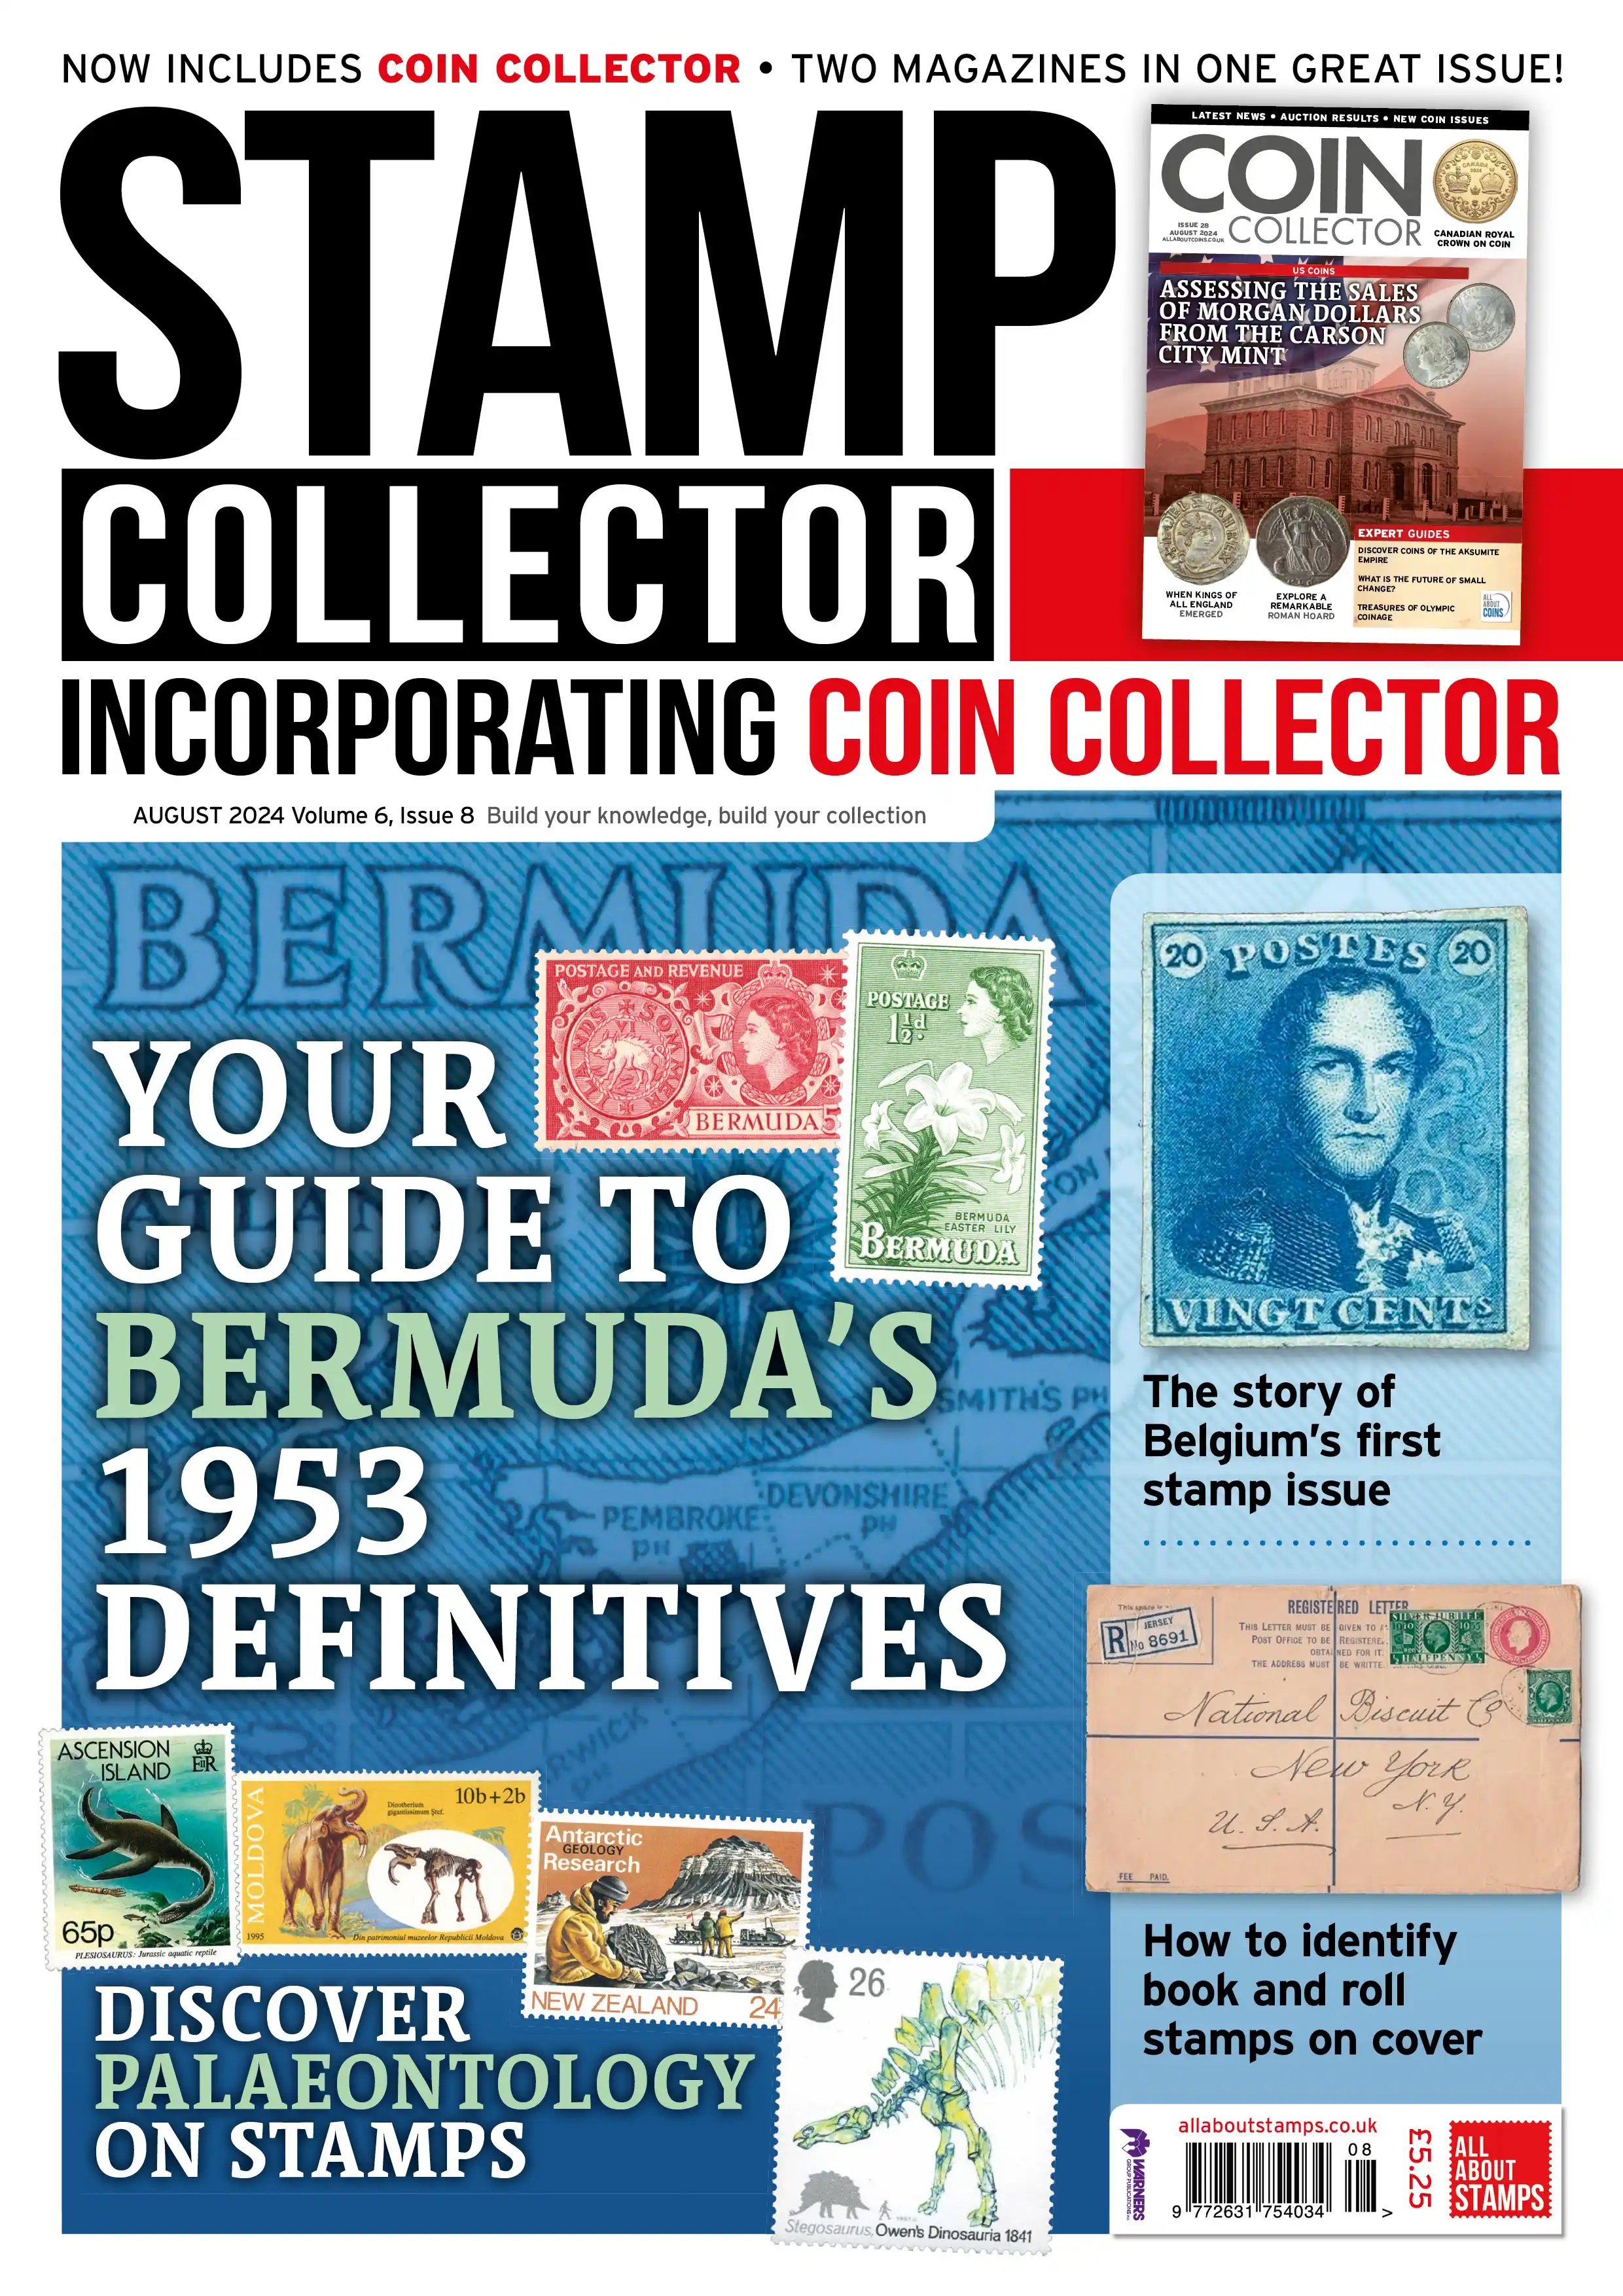 The cover of Stamp Collector Magazine, August 2024